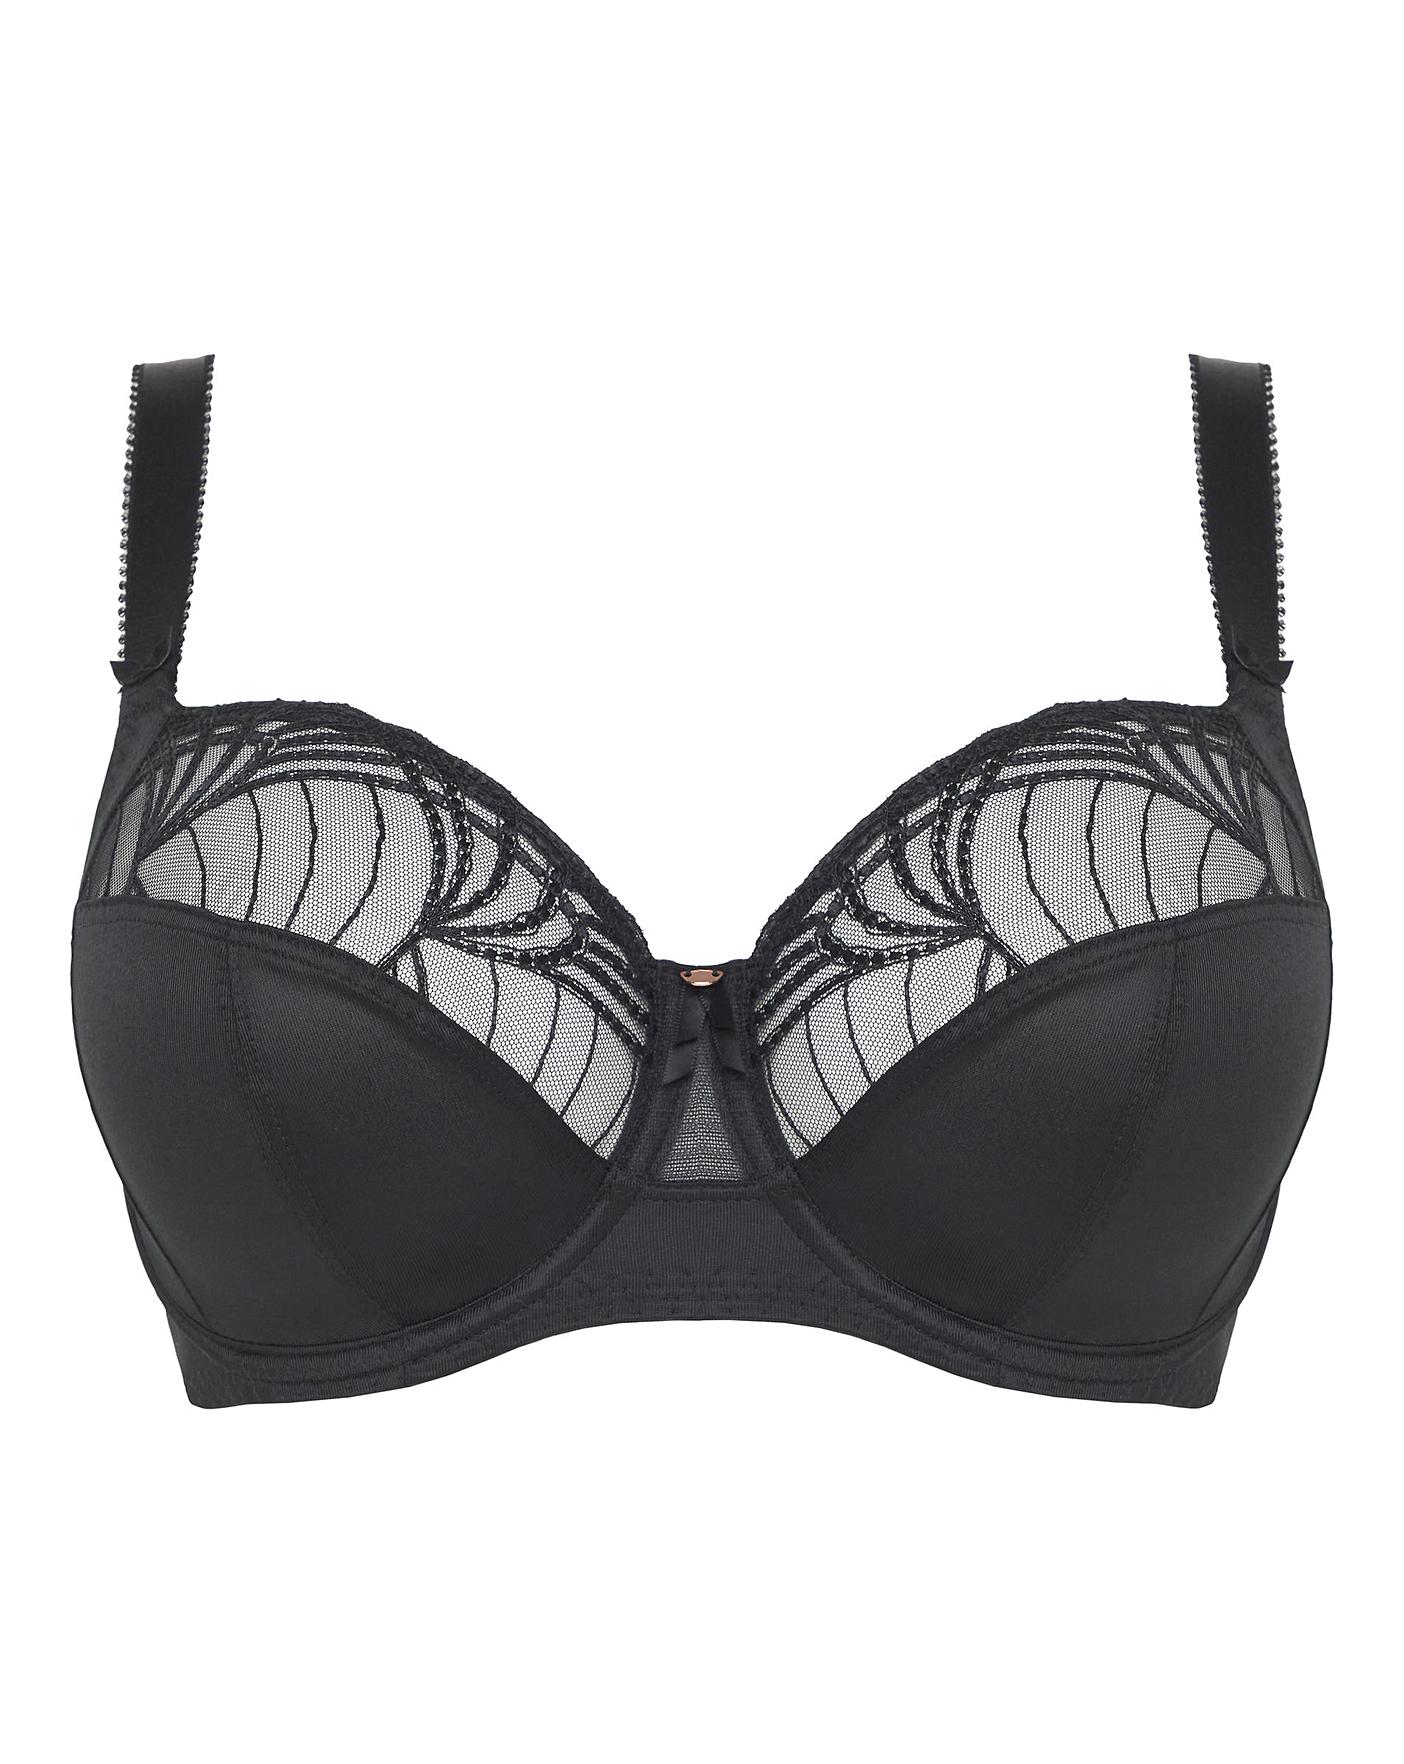 Fantasie Adelle Full Cup Wired Bra